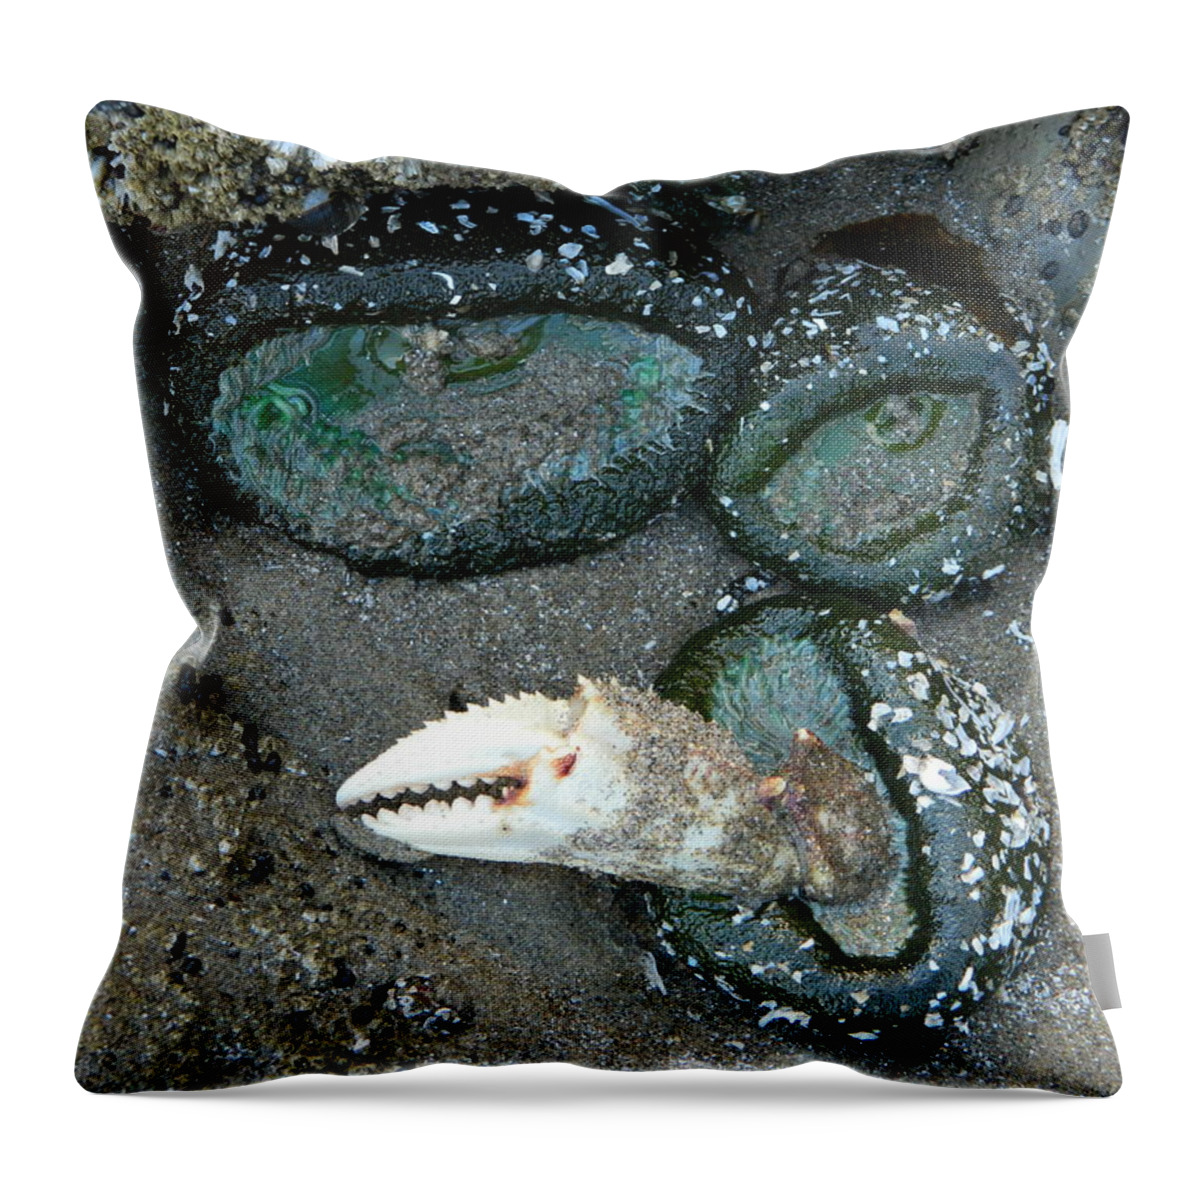 Sea Anemones Throw Pillow featuring the photograph Sea Anemones and a Crab Pincher by Gallery Of Hope 